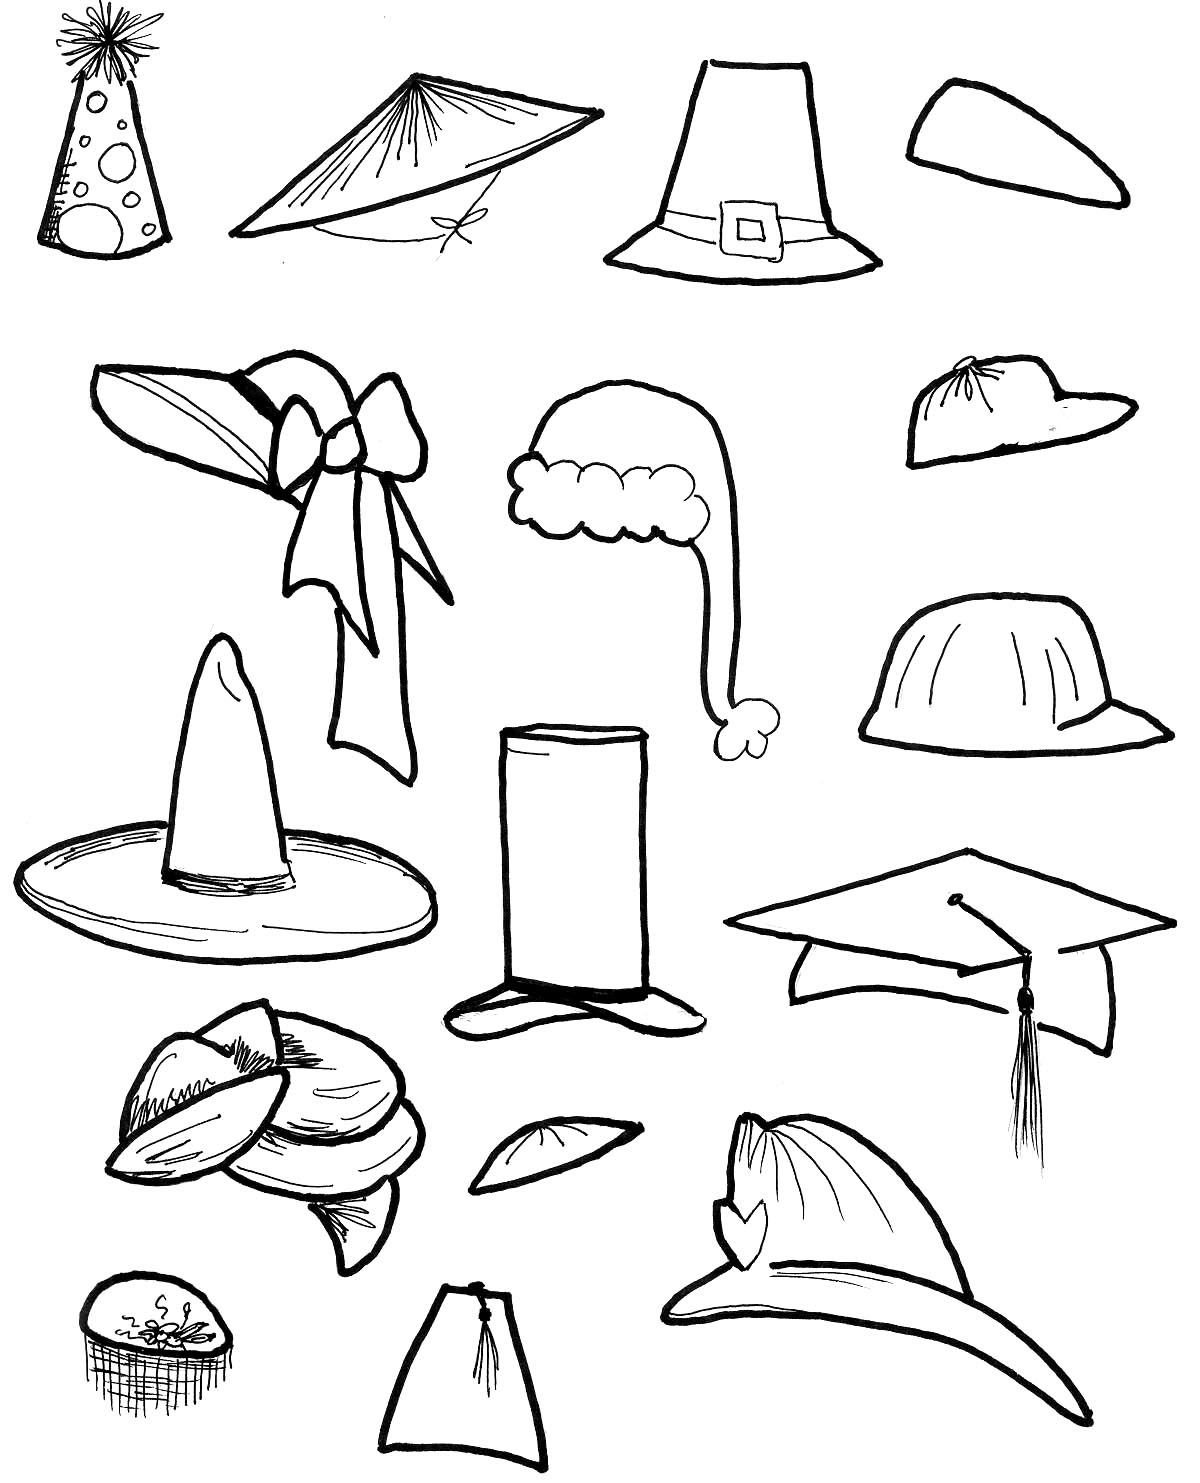 TYPES OF HAT Different types of Hat are illustrate in color on